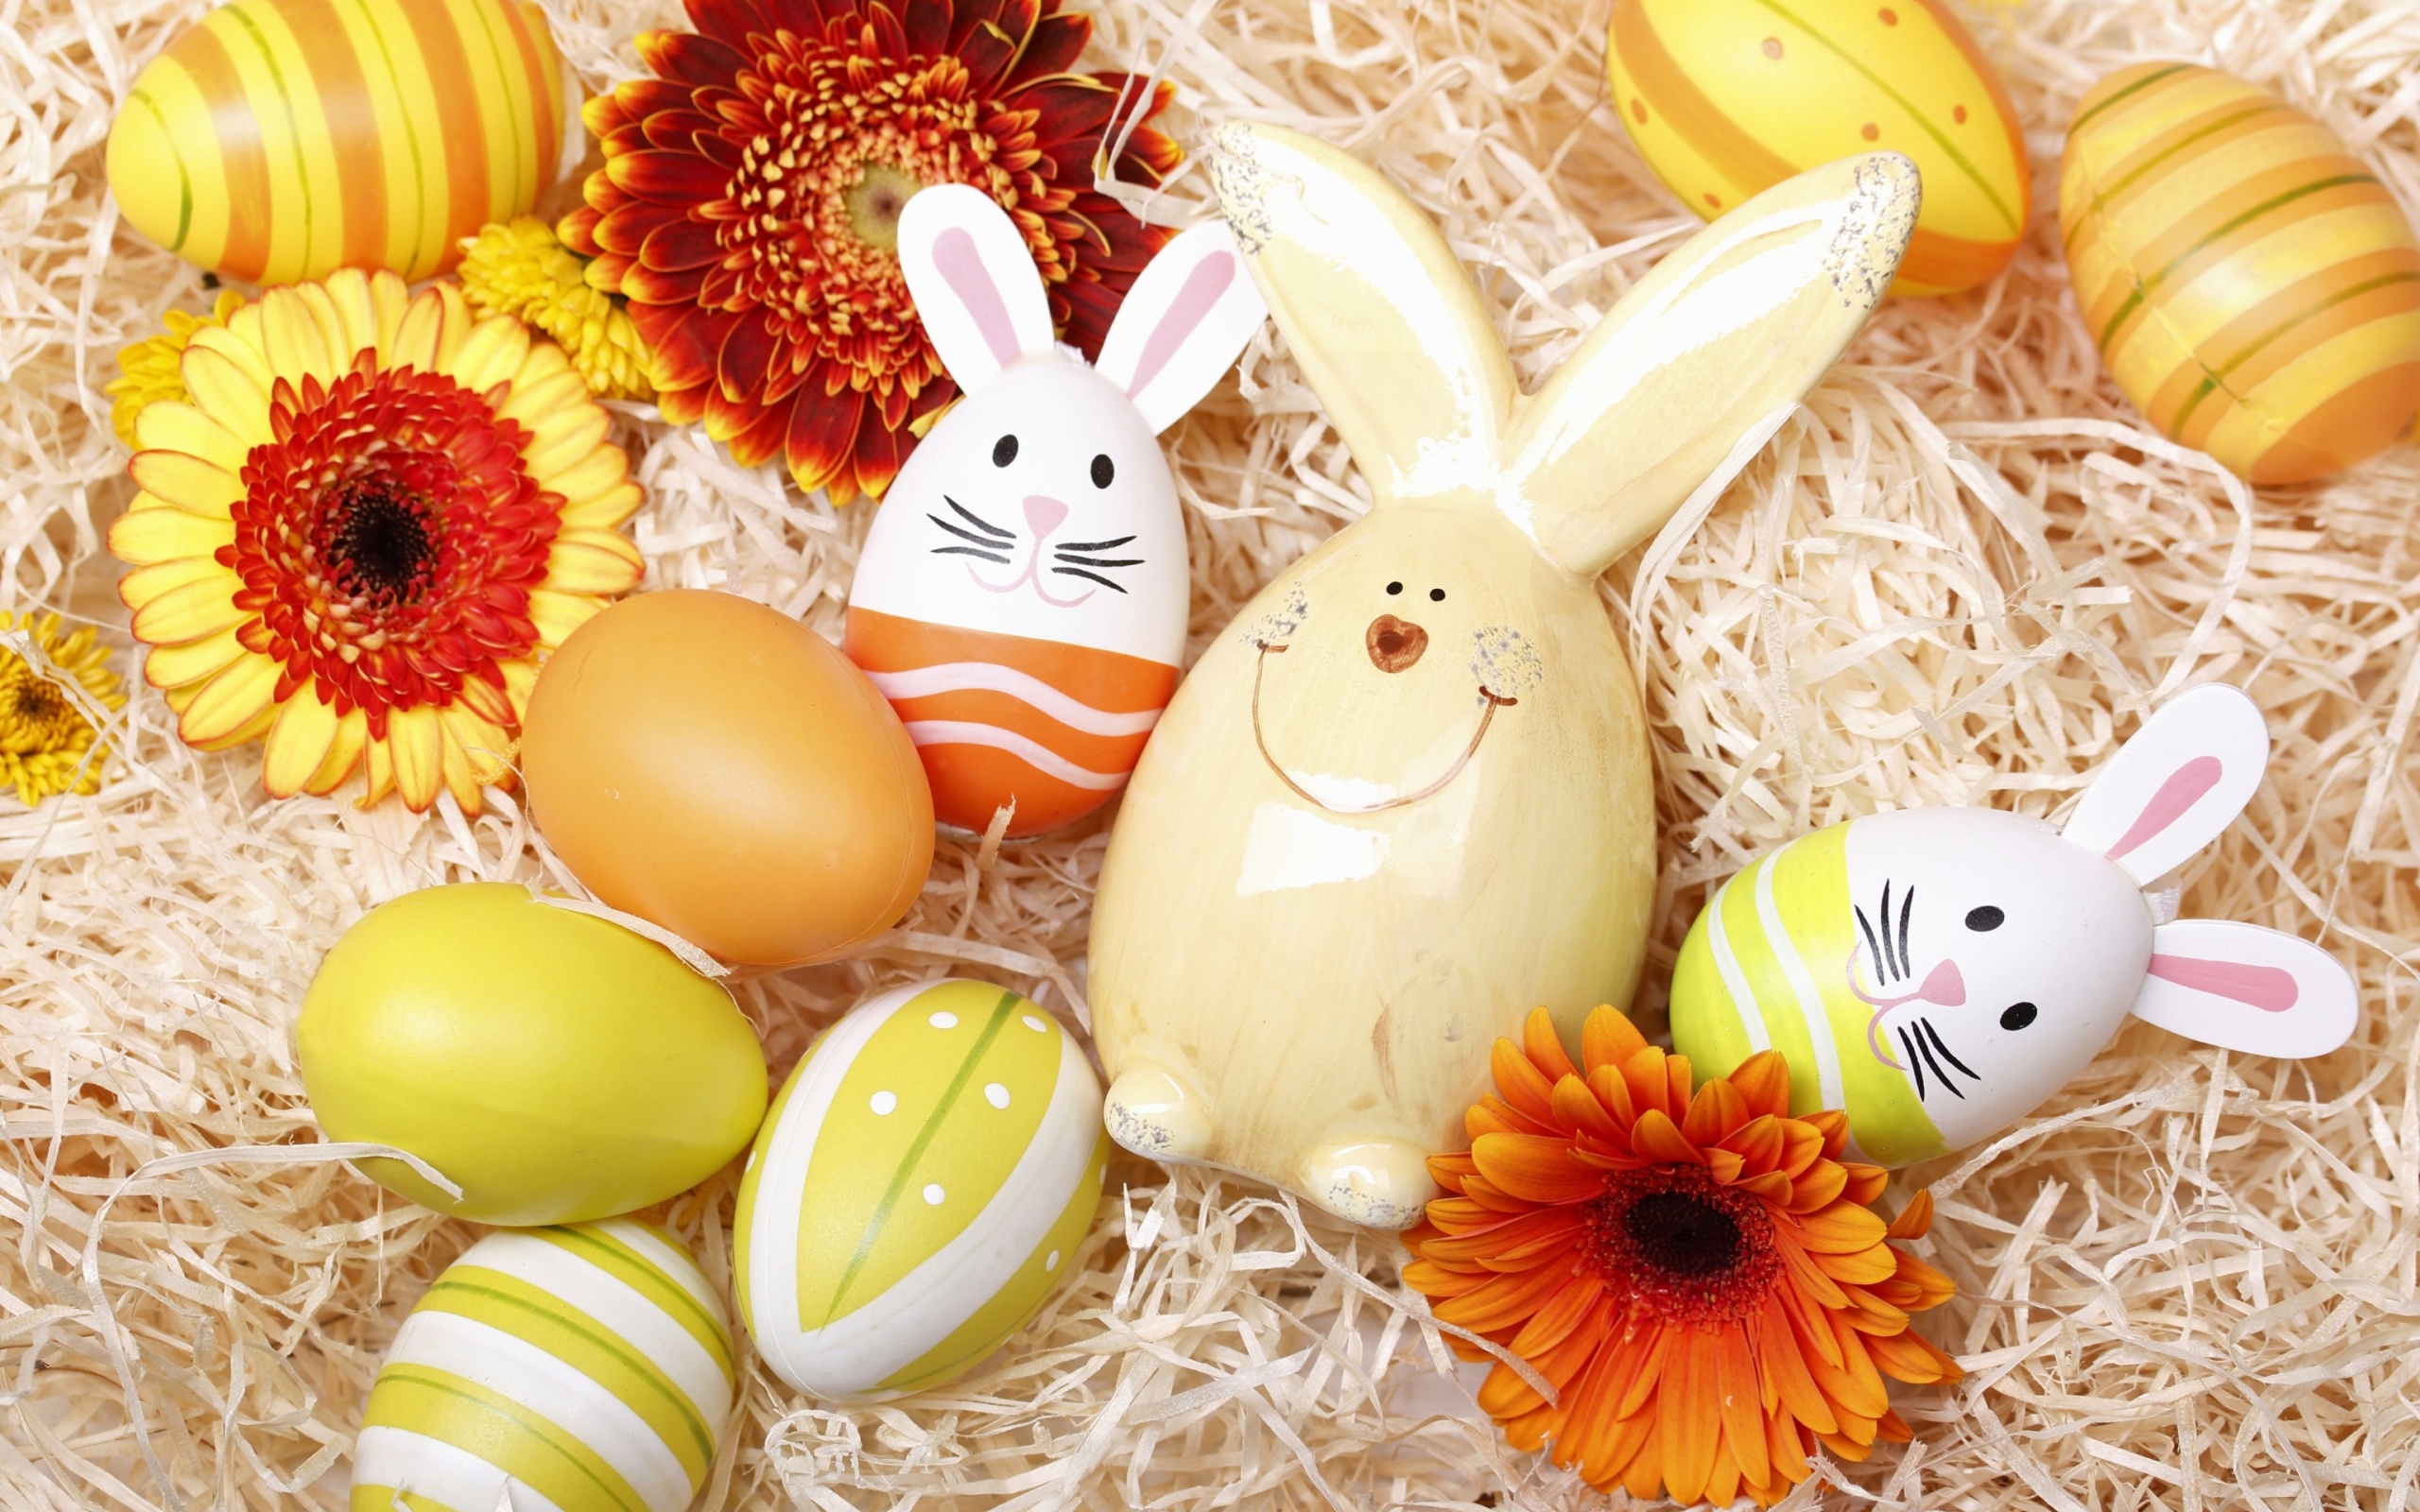 Das Easter Eggs Decoration with Hare Wallpaper 2560x1600